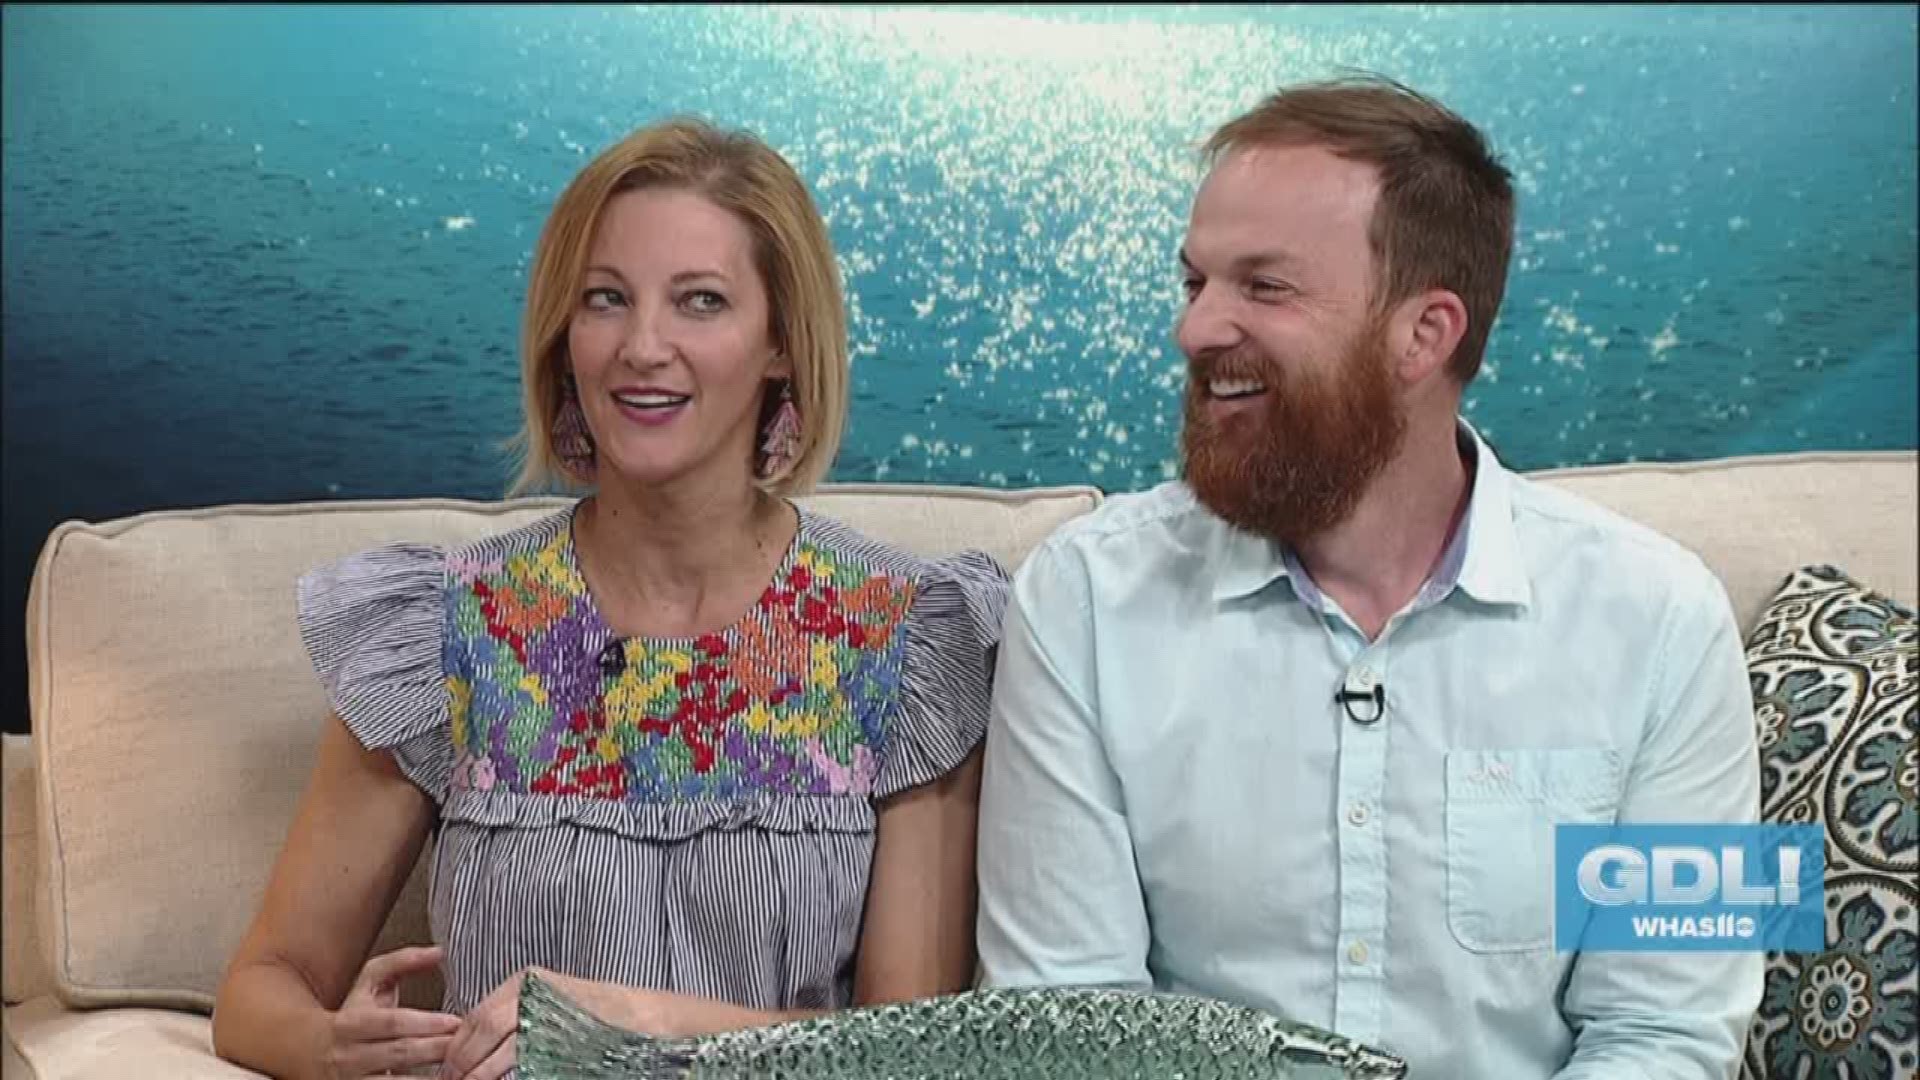 Ben Davis and Kelly K from WDJX stopped by Great Day Live to chat with Angie Fenton about the show, their careers and the prank they played on Angie's husband.